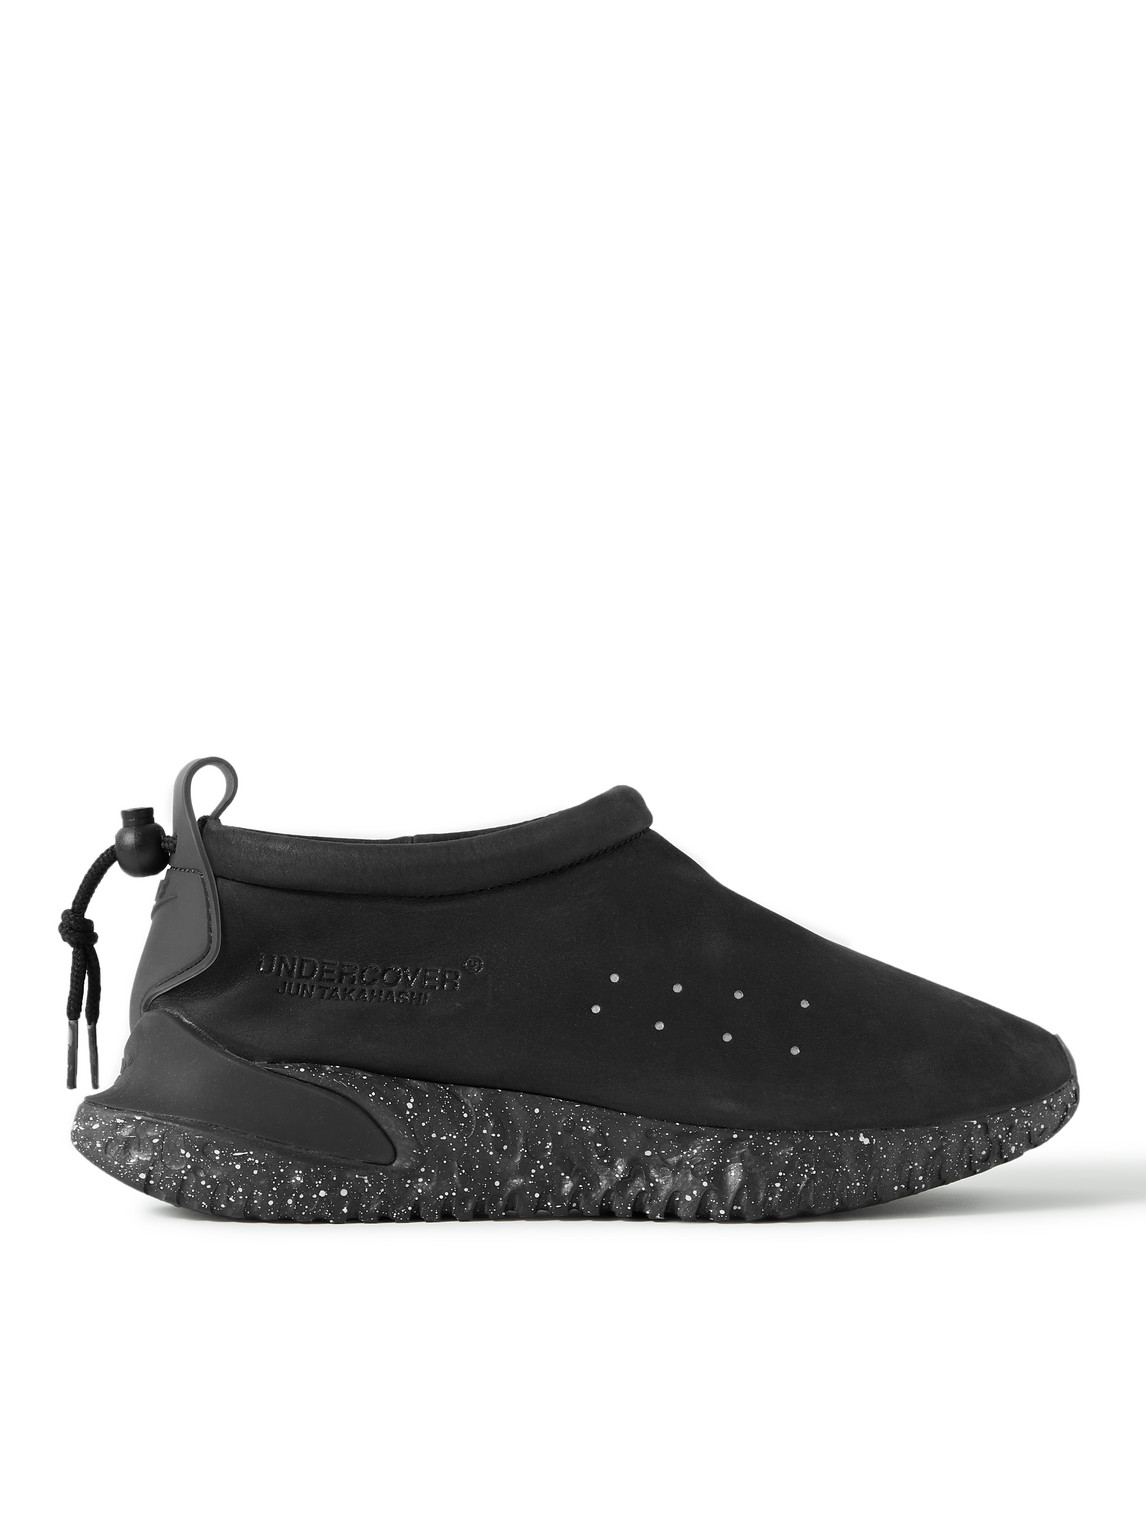 NIKE UNDERCOVER MOC FLOW SP RUBBER-TRIMMED SUEDE SLIP-ON SNEAKERS